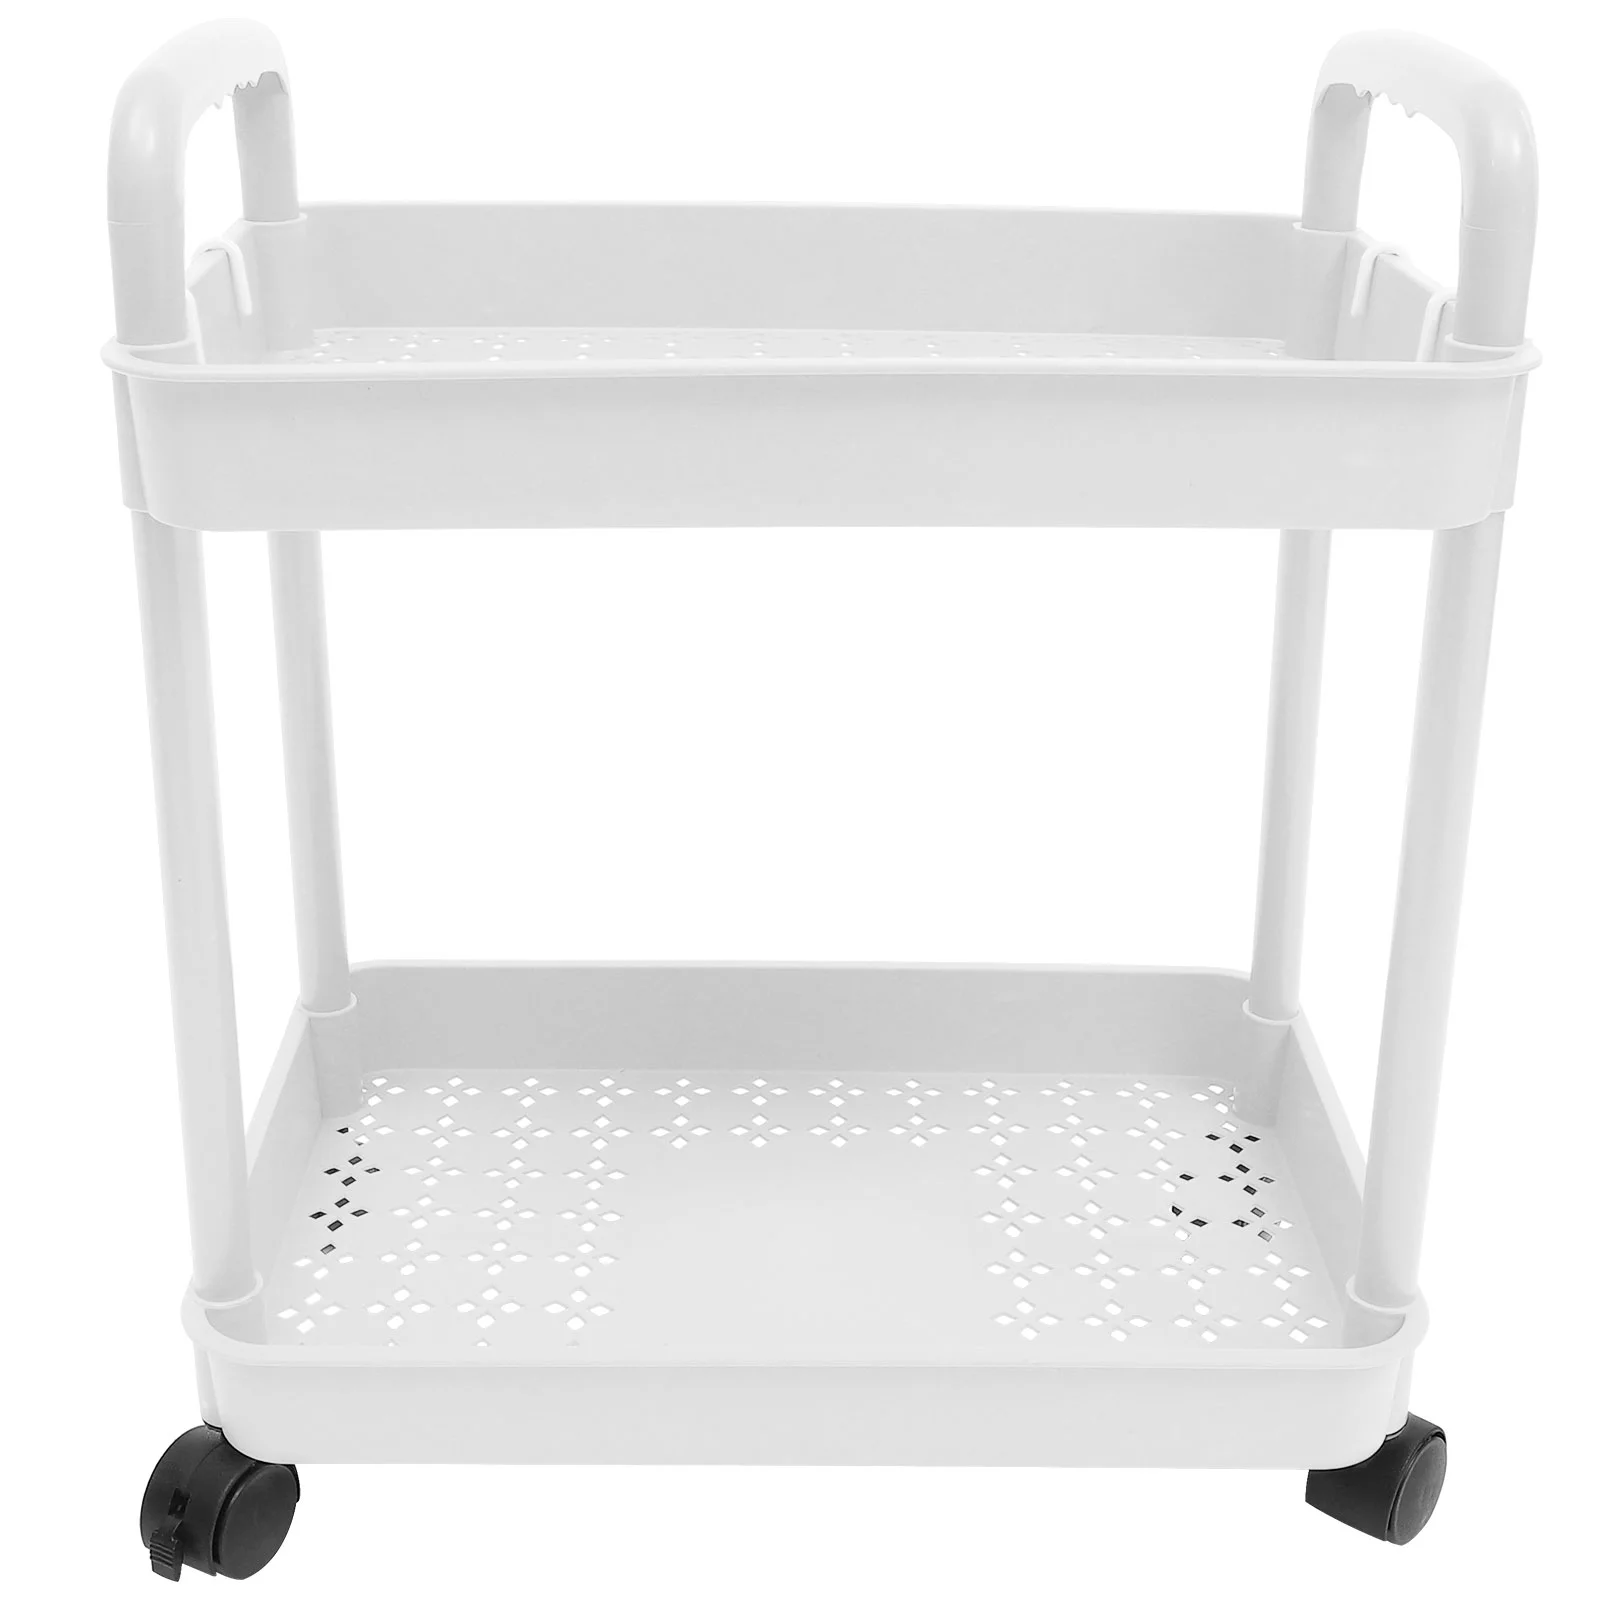 

Mobile Double Layer Cart Storage Rack Shelves Organizer Book Small Bathroom Dorm Pp Utility with Wheels Kitchen on